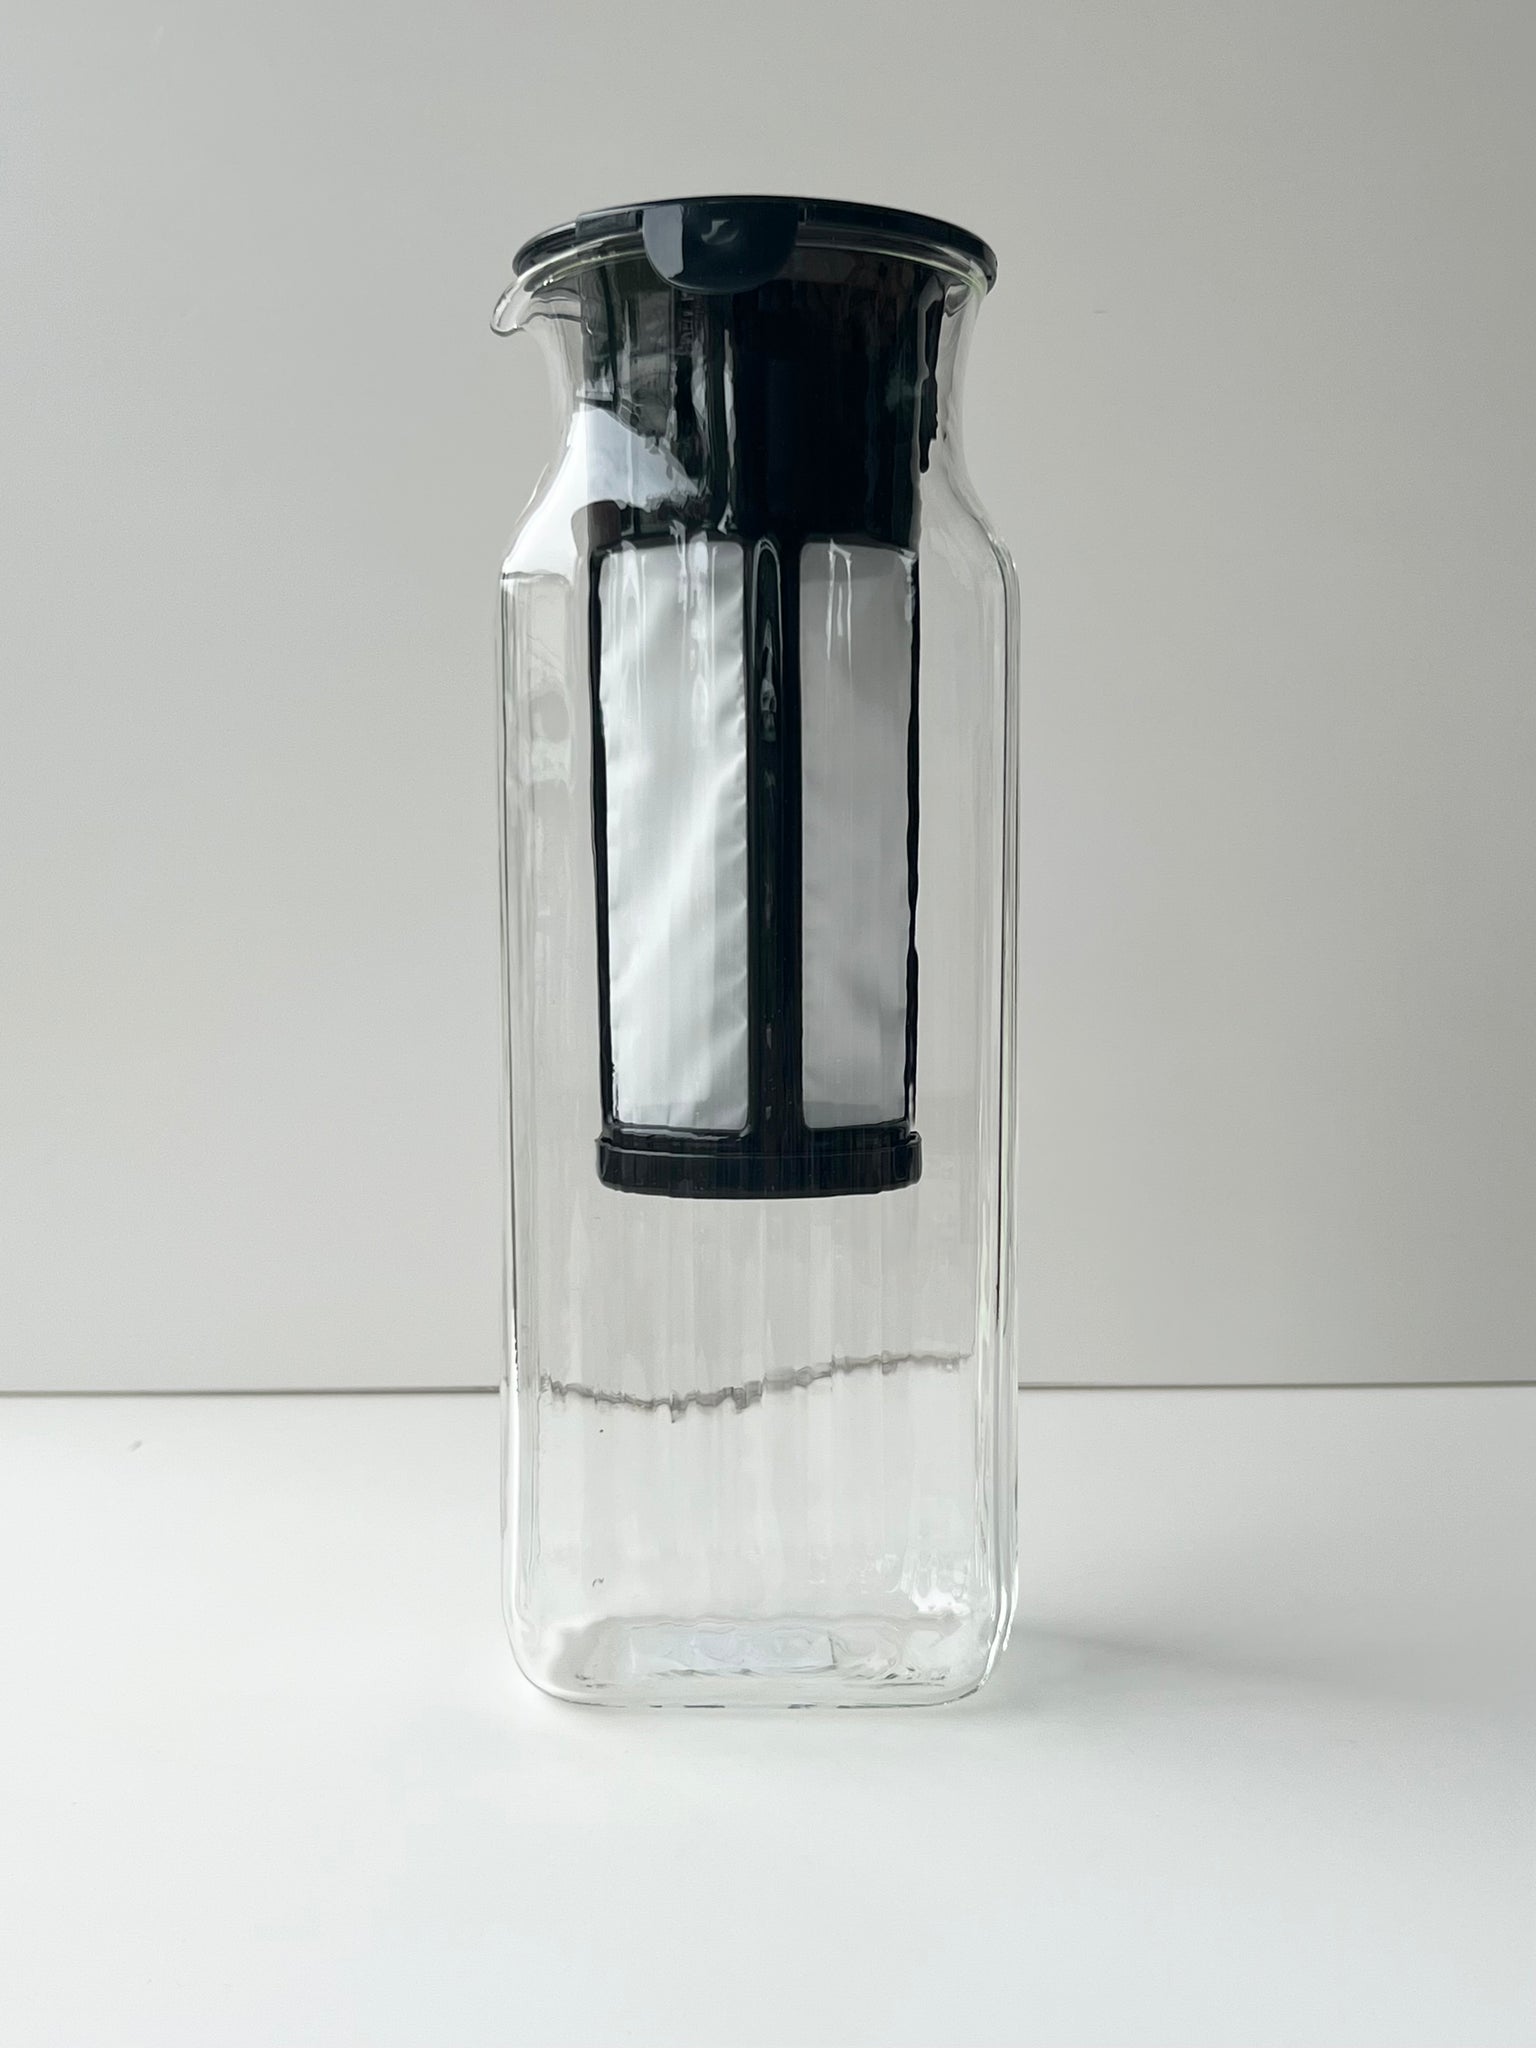 CARAFE WITH LID 1/2 LITRE 